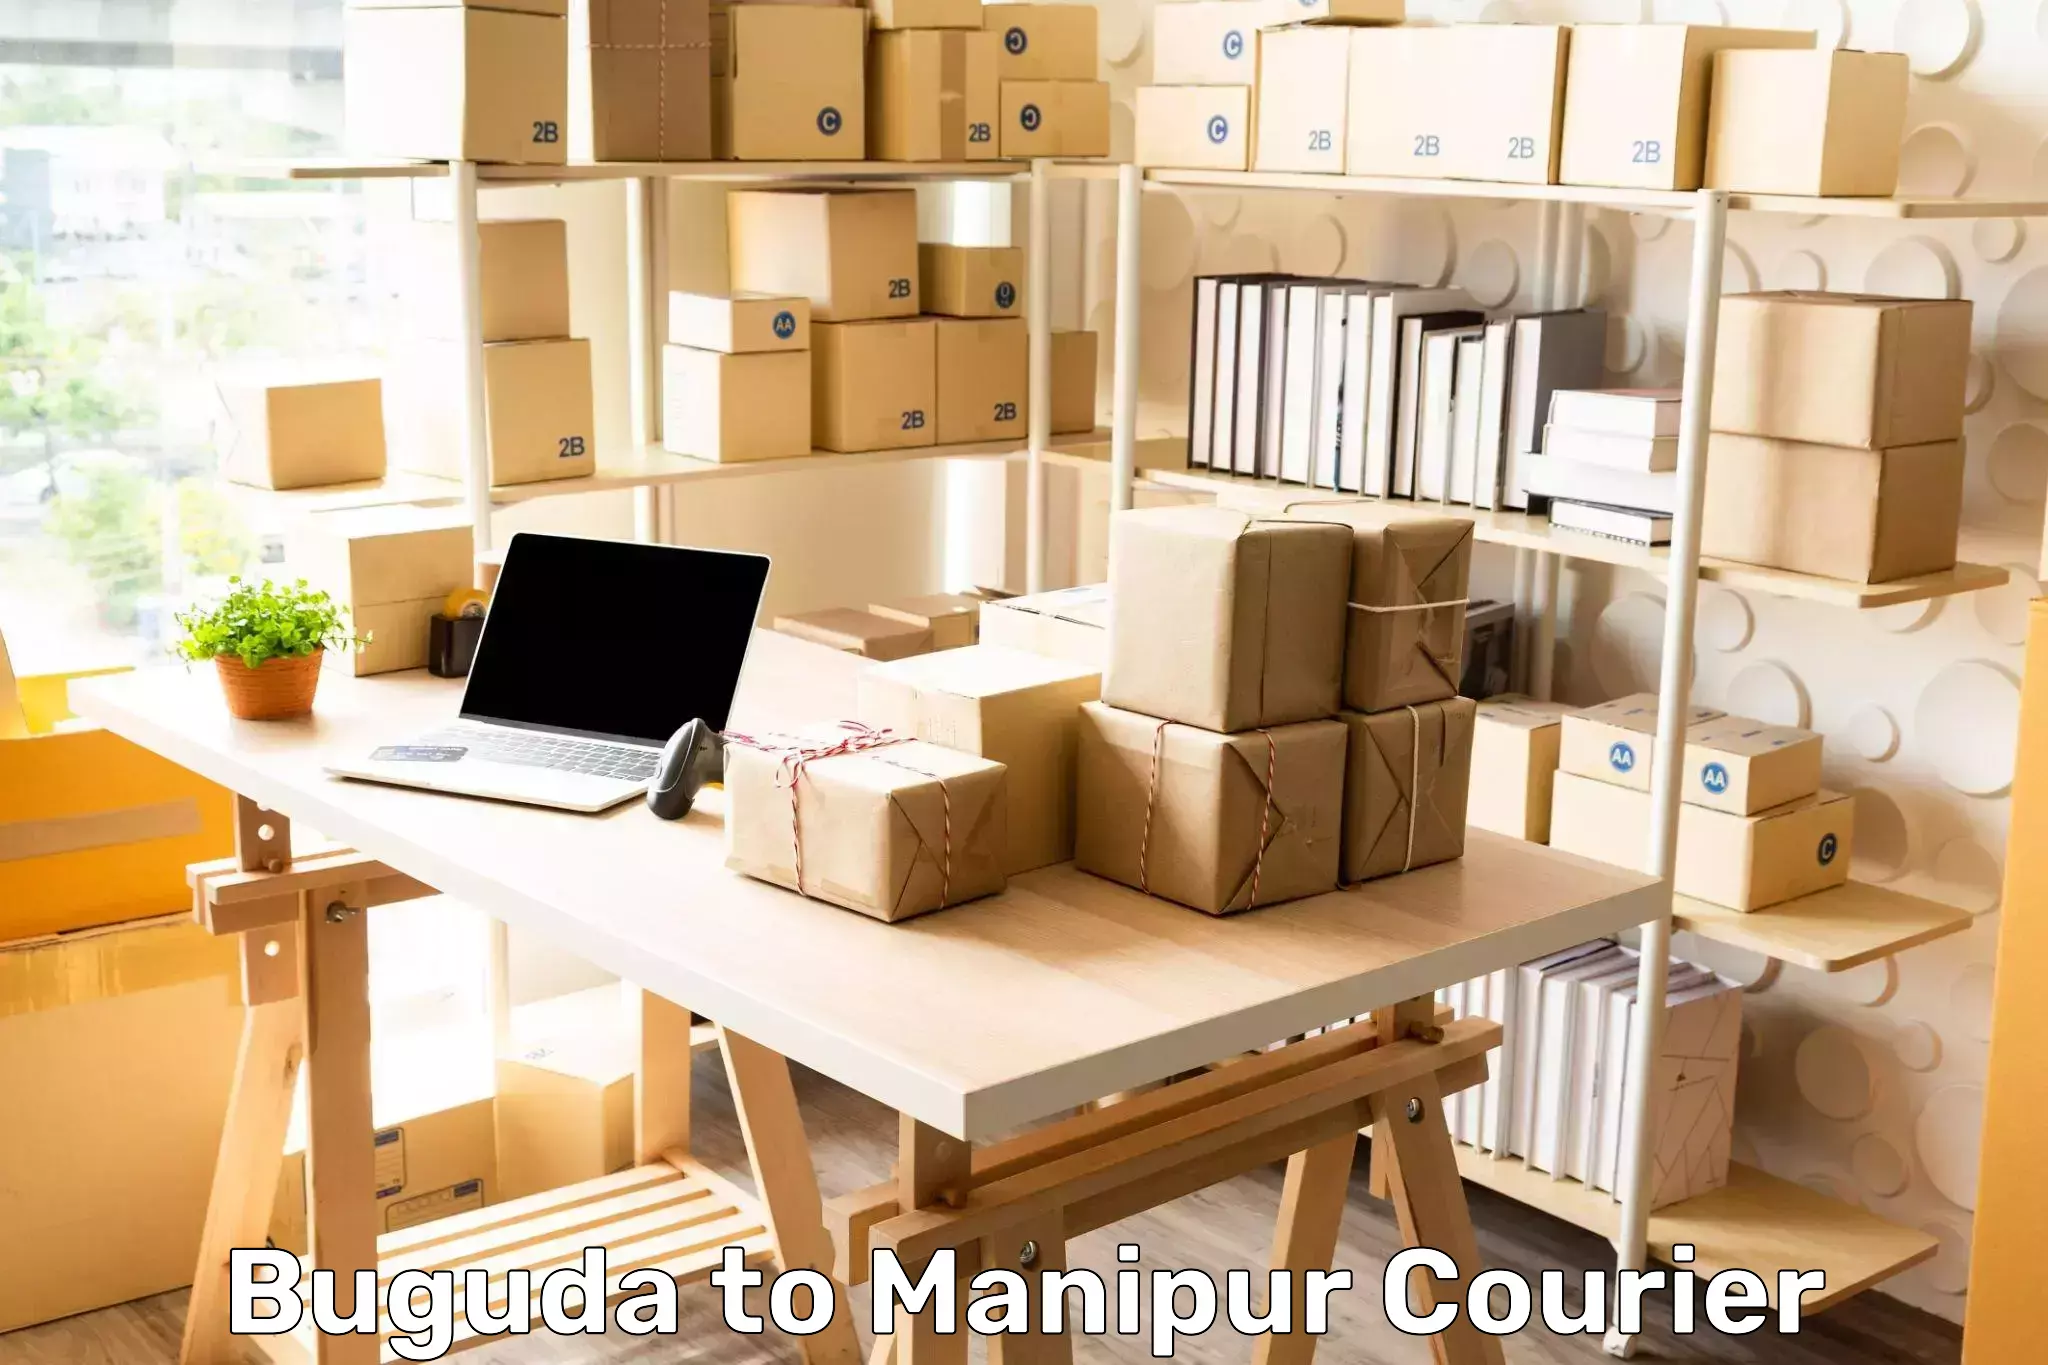 Sustainable shipping practices Buguda to Manipur